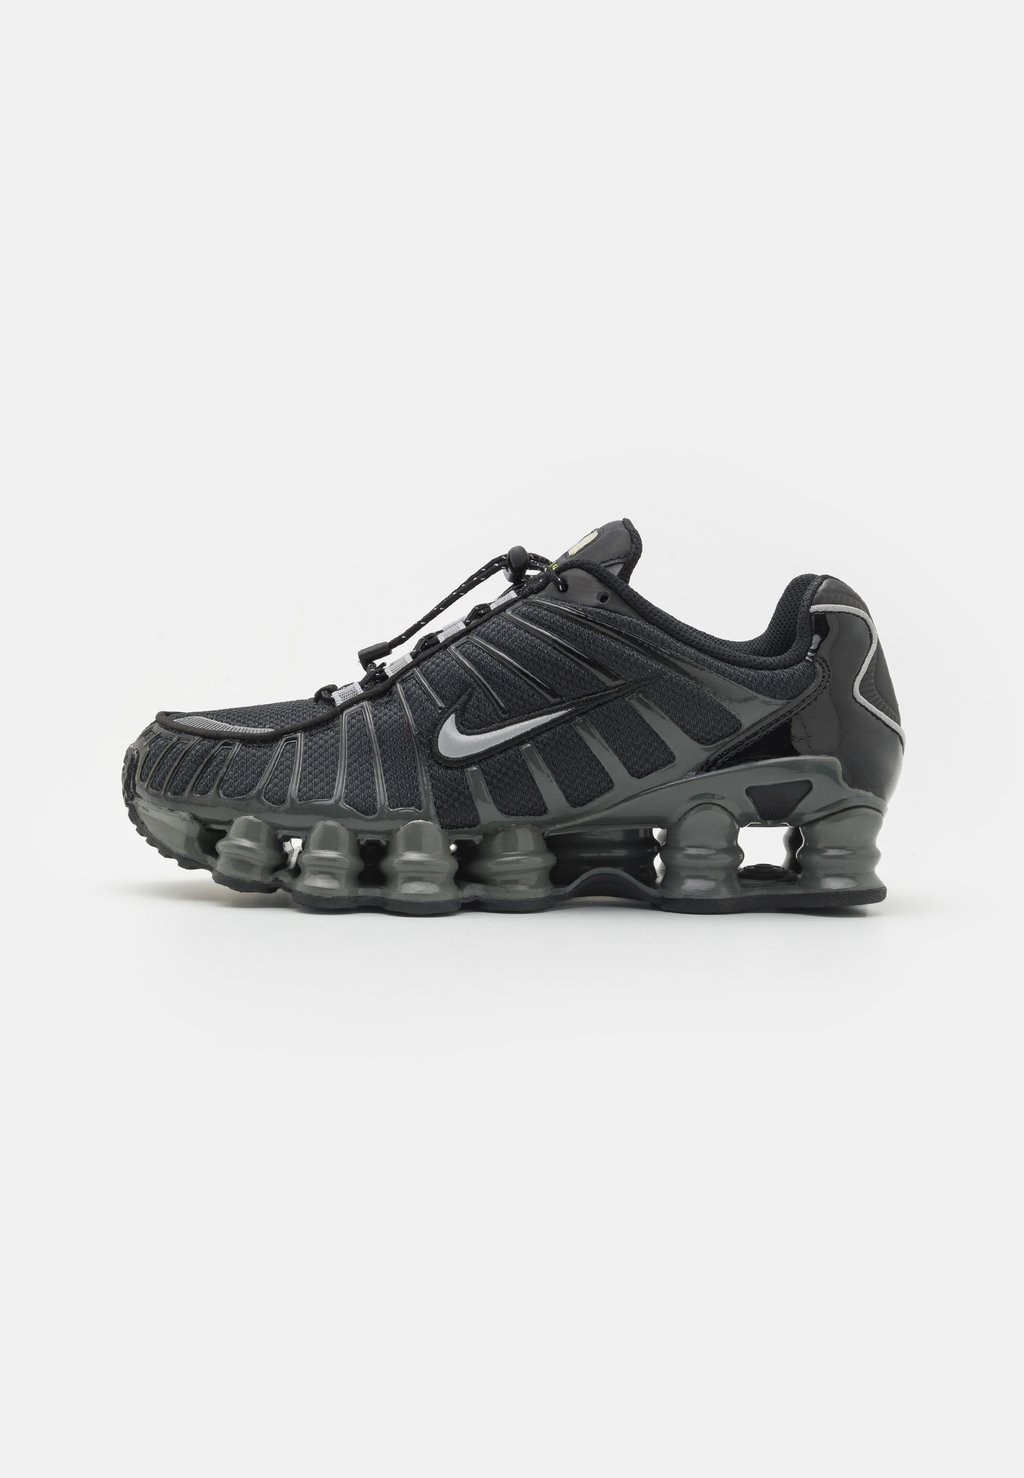 Кроссовки Nike SHOX, цвет black/metalic silver/anthracite/high voltage 10pcs stth1506dpi or stth1506di stth1506df stth1506d stth1506tpi dop3i 15a 600v ultrafast high voltage rectifier